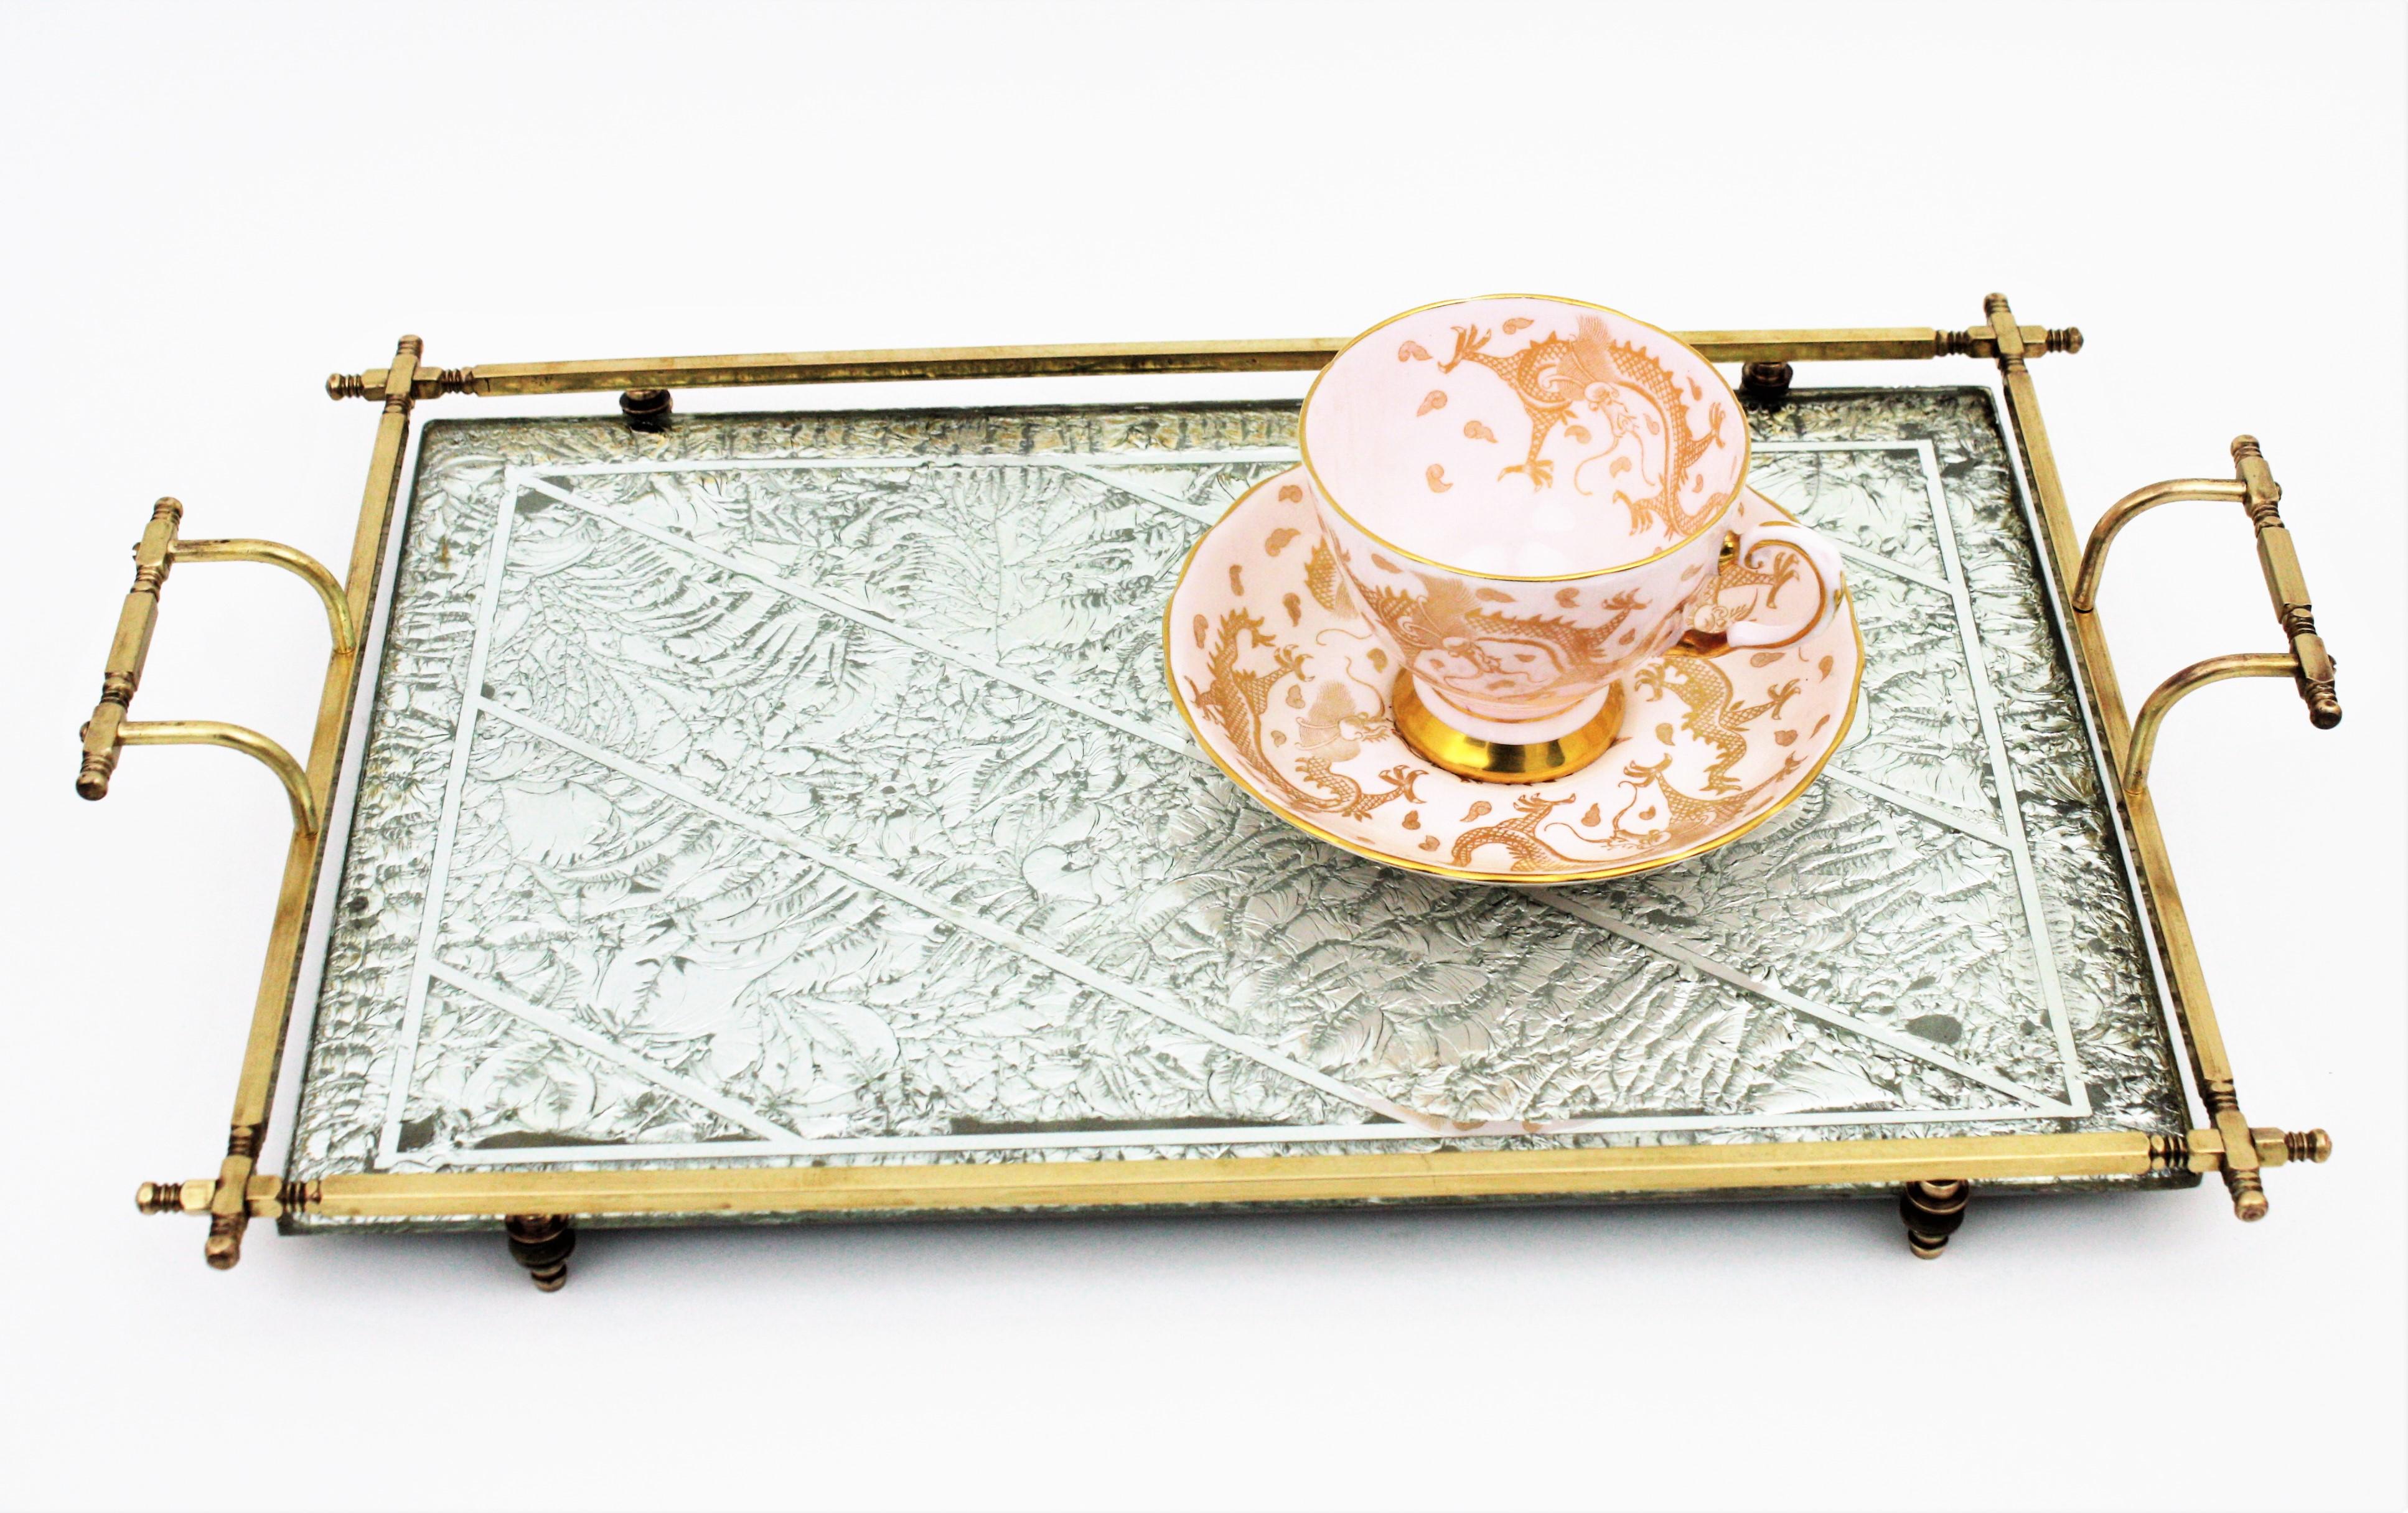 One of a kind Art Deco mirror and brass handled serving tray /vanity tray with silver leaf decorative motifs, France, 1930s.
The mirrored surface has silver leaf naturalistic decorations accented by stripes. It is suspended on a polished brass